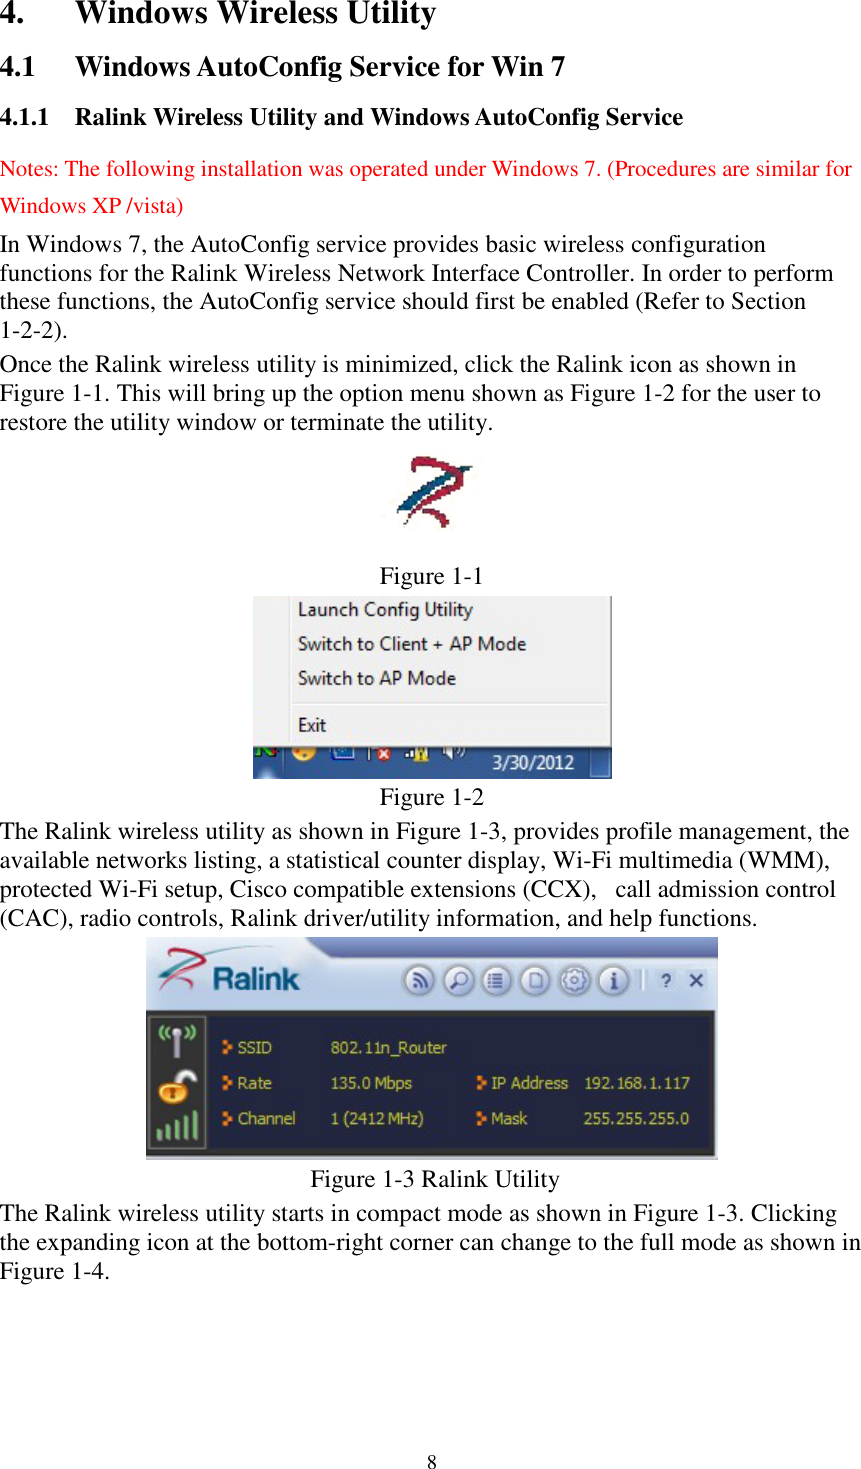 84. Windows Wireless Utility4.1 Windows AutoConfig Service for Win 74.1.1 Ralink Wireless Utility and Windows AutoConfig ServiceNotes: The following installation was operated under Windows 7. (Procedures are similar forWindows XP /vista)In Windows 7, the AutoConfig service provides basic wireless configurationfunctions for the Ralink Wireless Network Interface Controller. In order to performthese functions, the AutoConfig service should first be enabled (Refer to Section1-2-2).Once the Ralink wireless utility is minimized, click the Ralink icon as shown inFigure 1-1. This will bring up the option menu shown as Figure 1-2 for the user torestore the utility window or terminate the utility.Figure 1-1Figure 1-2The Ralink wireless utility as shown in Figure 1-3, provides profile management, theavailable networks listing, a statistical counter display, Wi-Fi multimedia (WMM),protected Wi-Fi setup, Cisco compatible extensions (CCX), call admission control(CAC), radio controls, Ralink driver/utility information, and help functions.Figure 1-3 Ralink UtilityThe Ralink wireless utility starts in compact mode as shown in Figure 1-3. Clickingthe expanding icon at the bottom-right corner can change to the full mode as shown inFigure 1-4.